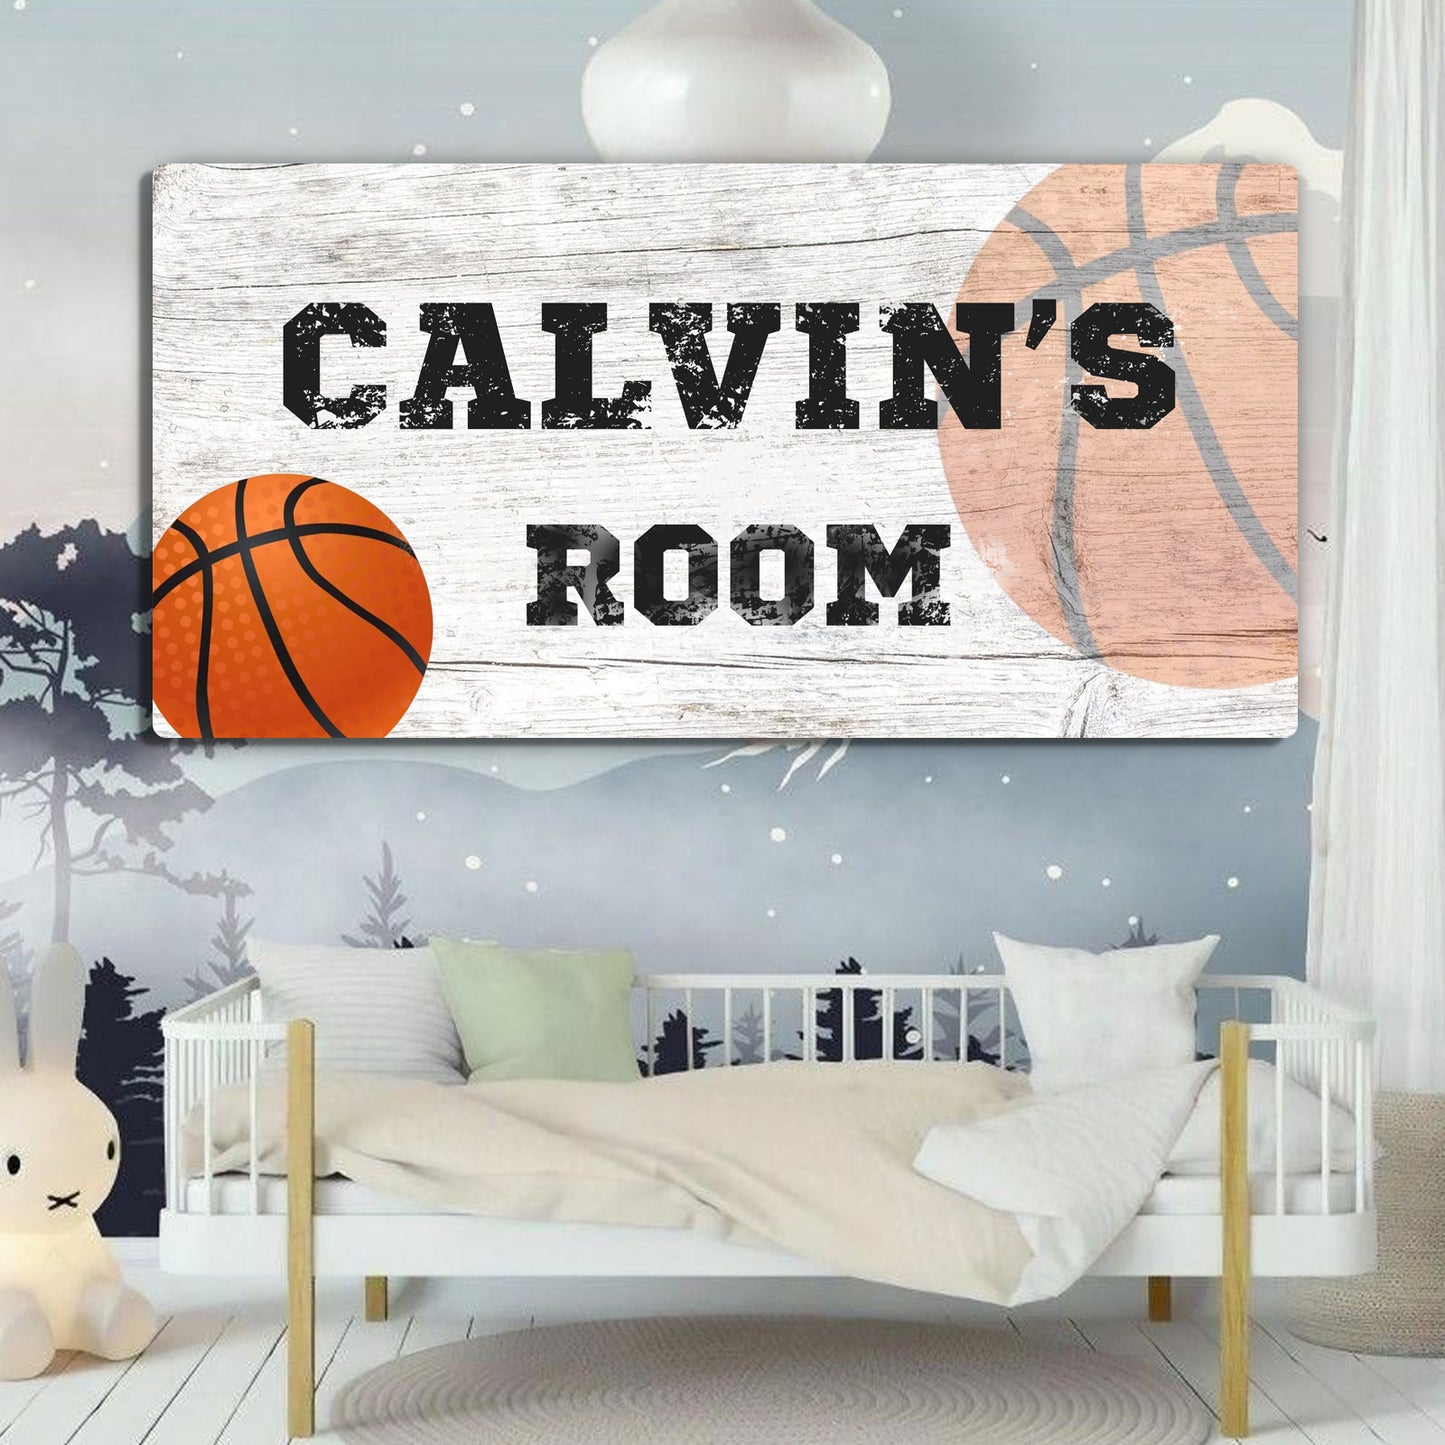 Kid's room Sign - Image by Tailored Canvases